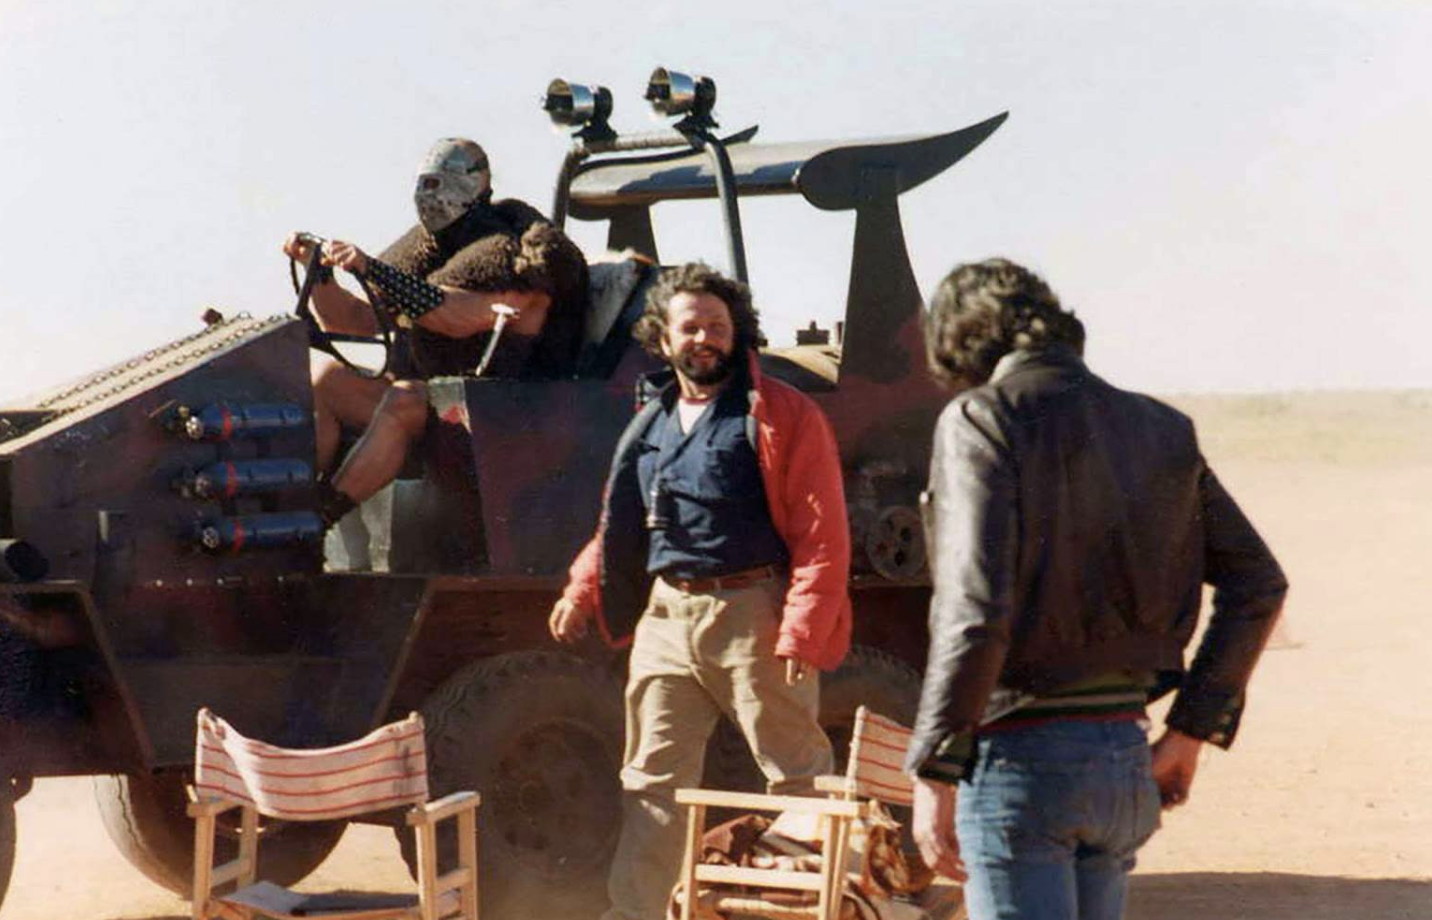 Behind the scenes of "Mad Max 2", circa 1981